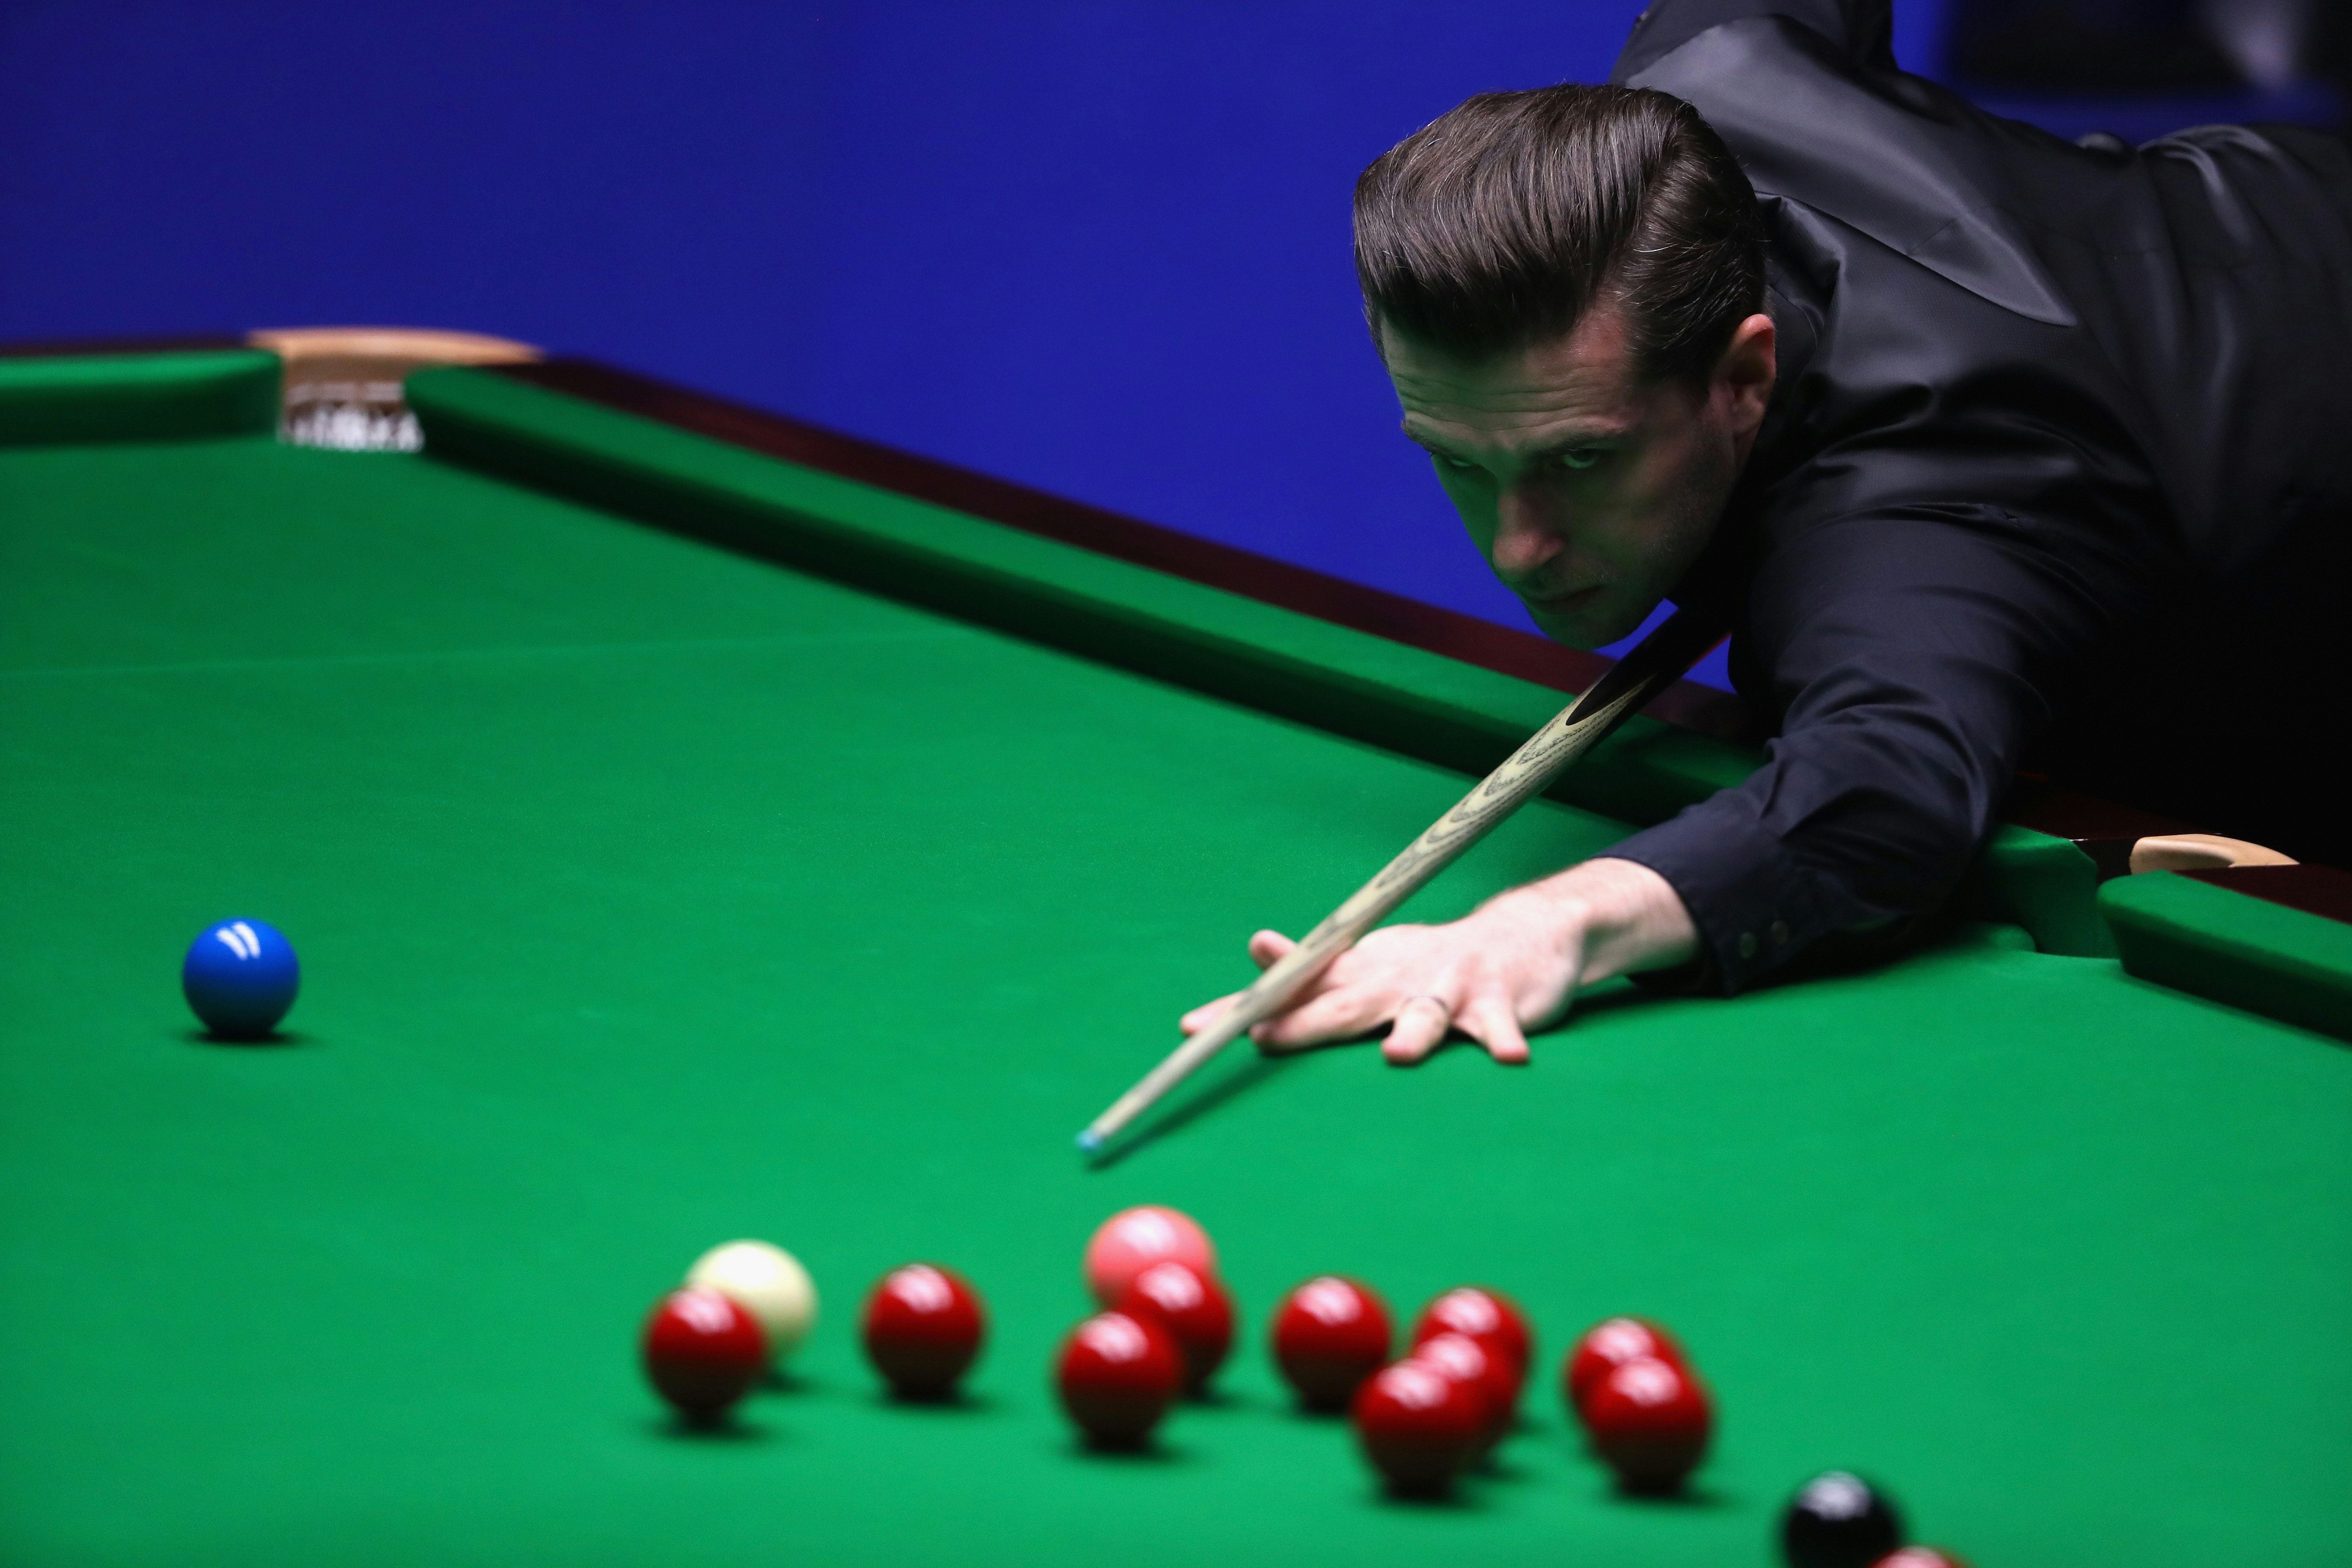 DAZN secures World Snooker rights in Canada SportBusiness Media